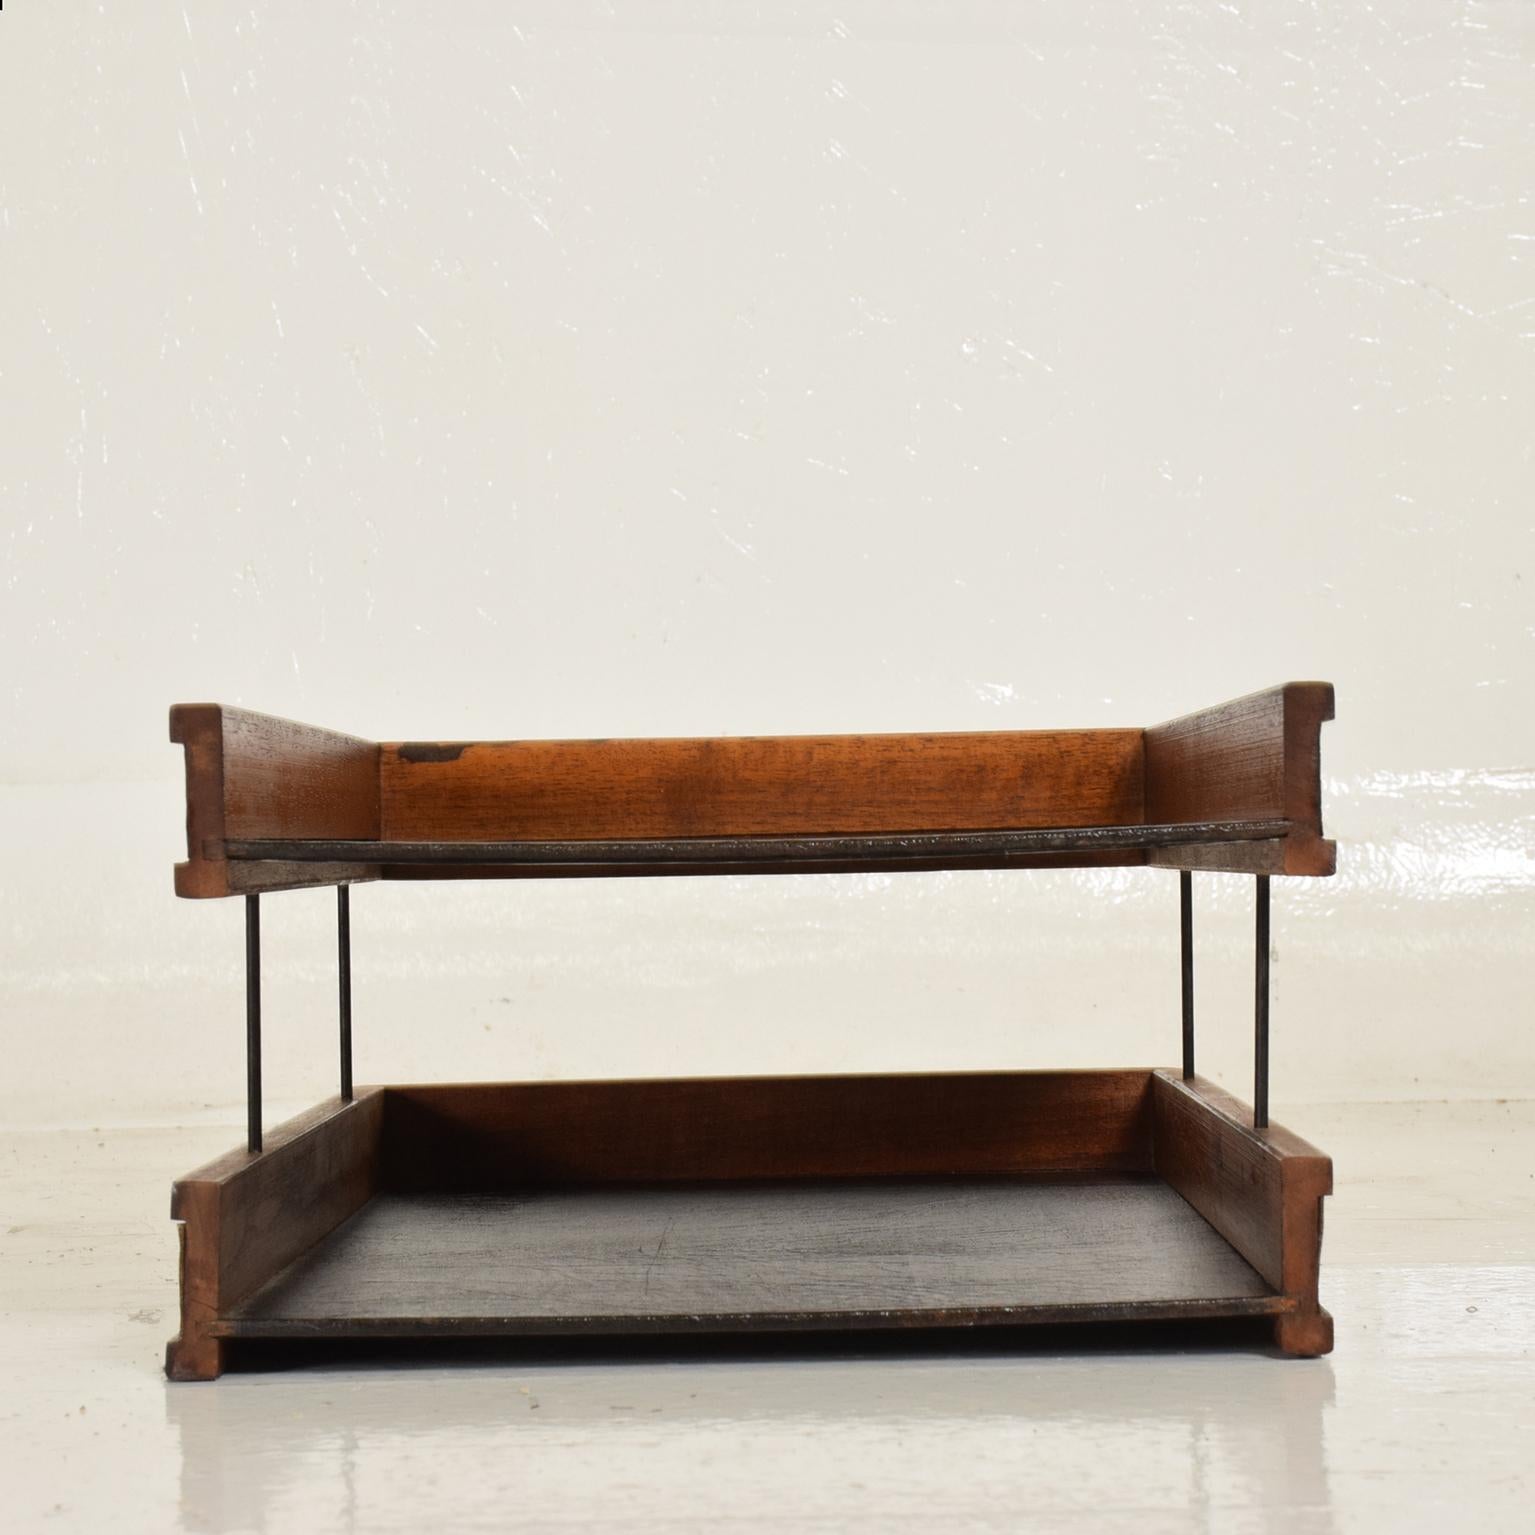 American Mid-Century Modern Office Tray Accessories, Wood and Faux Leather